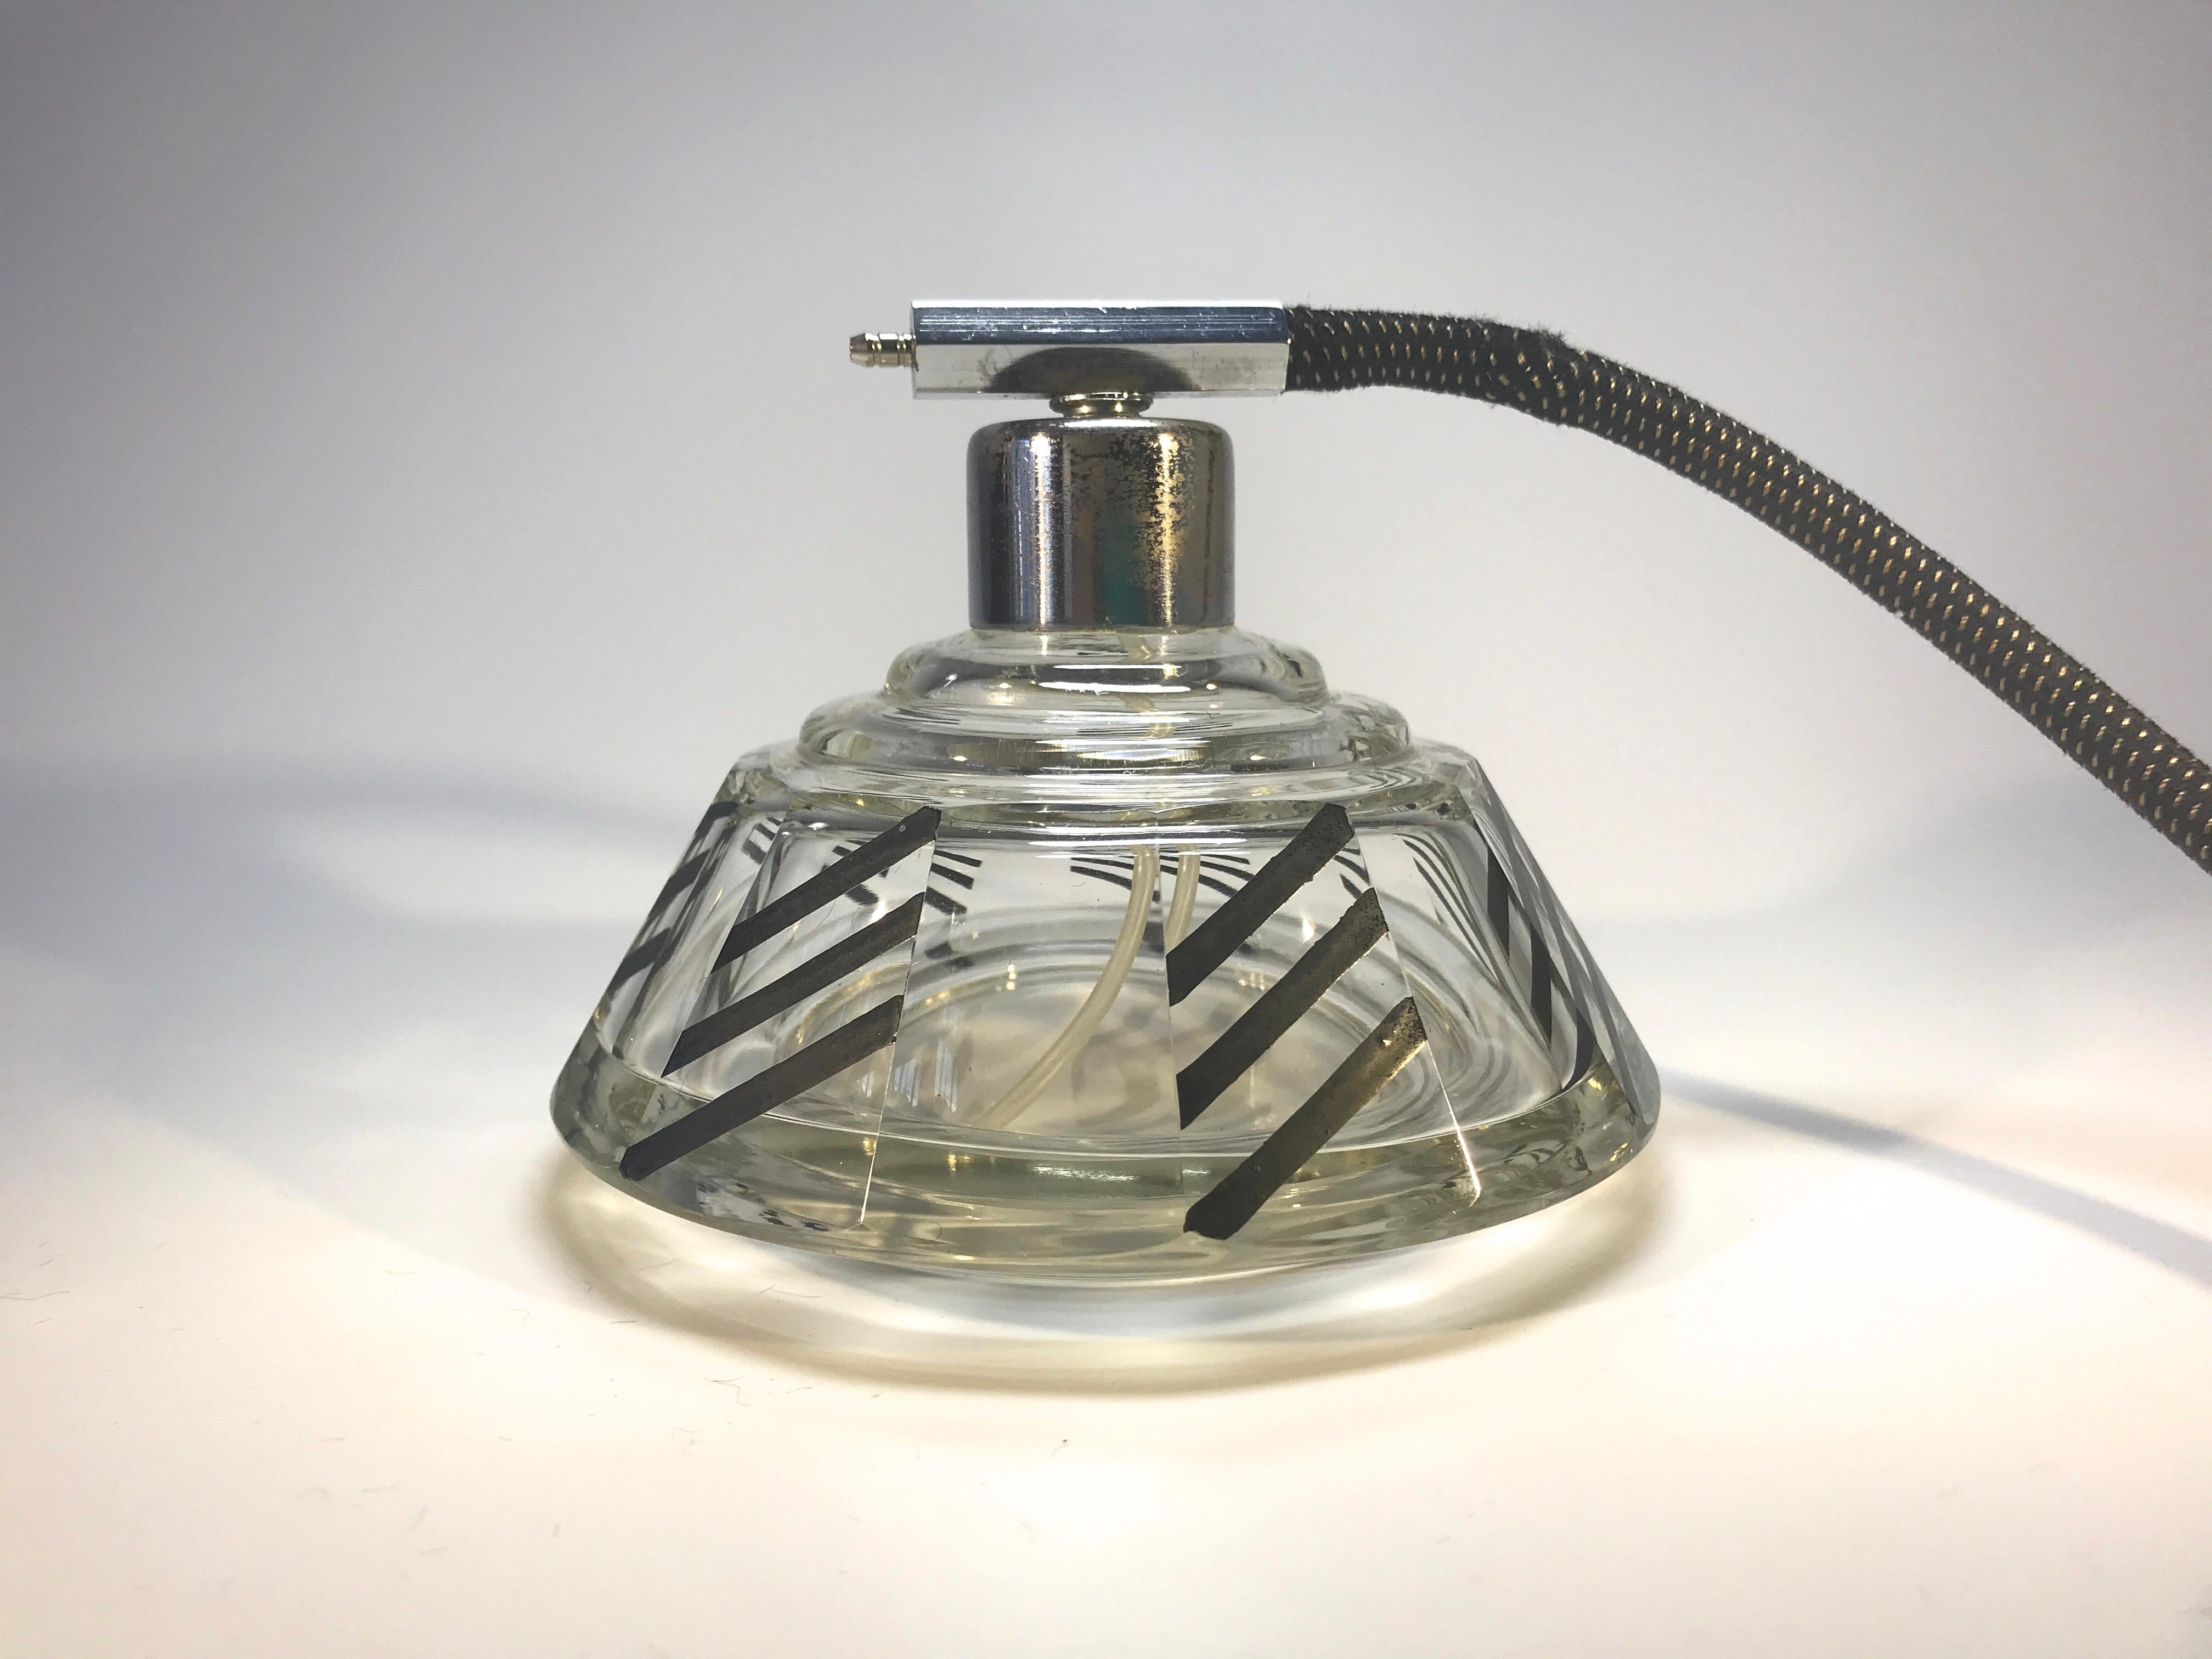 Superb Karl Palda Art Deco large crystal perfume atomiser from the 1930s
An impressive round clear flask with bold, black enamel geometric lines in excellent condition
Original silk bulb and tassel
Vintage Bohemian, Czech crystal,
circa